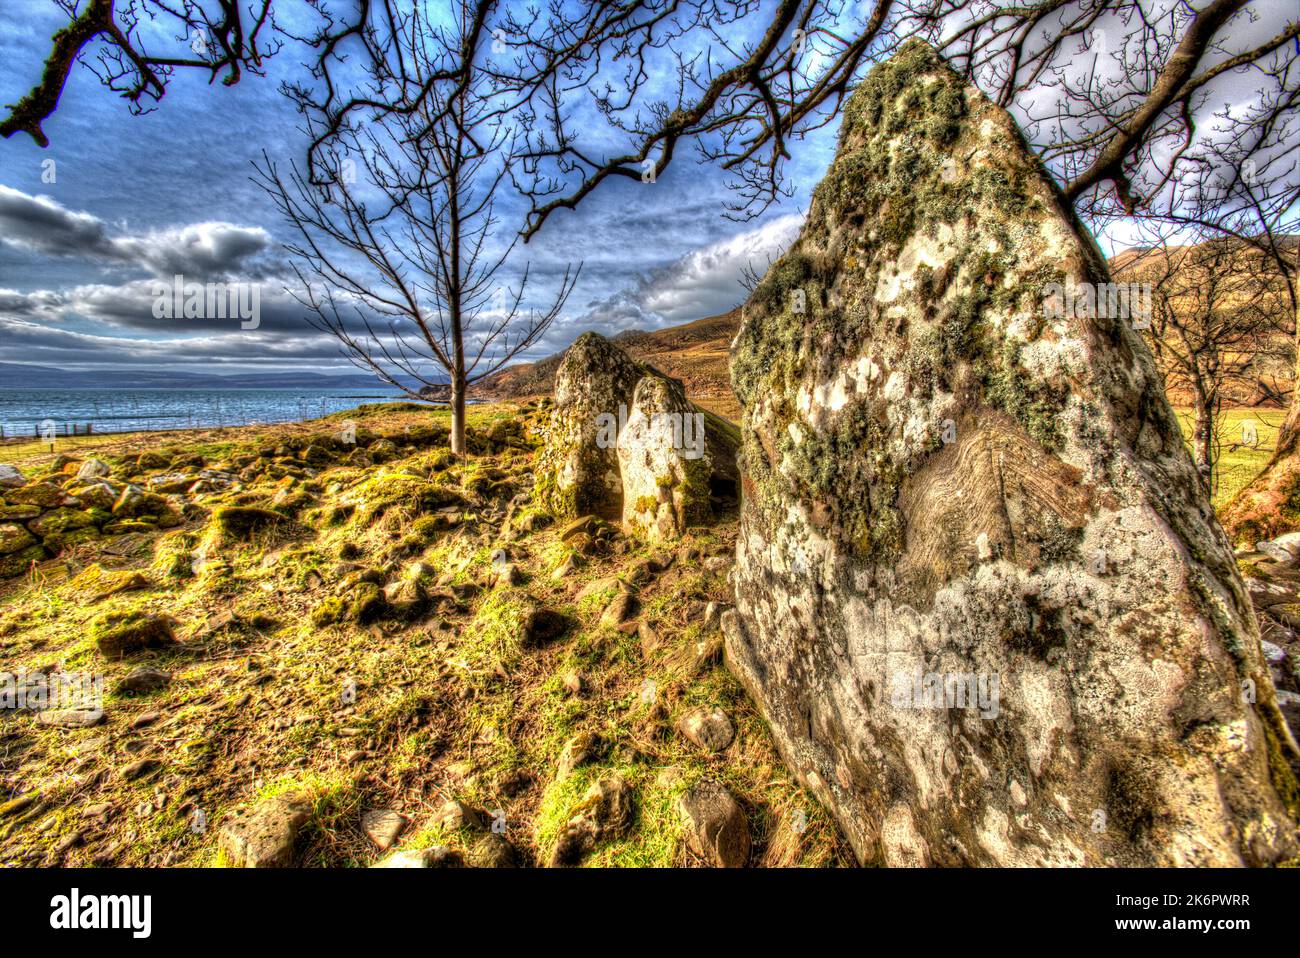 Peninsula of Ardamurchan, Scotland. Artistic view of façade stones at Camas nan Geall’s Neolithic chambered cairn. Stock Photo